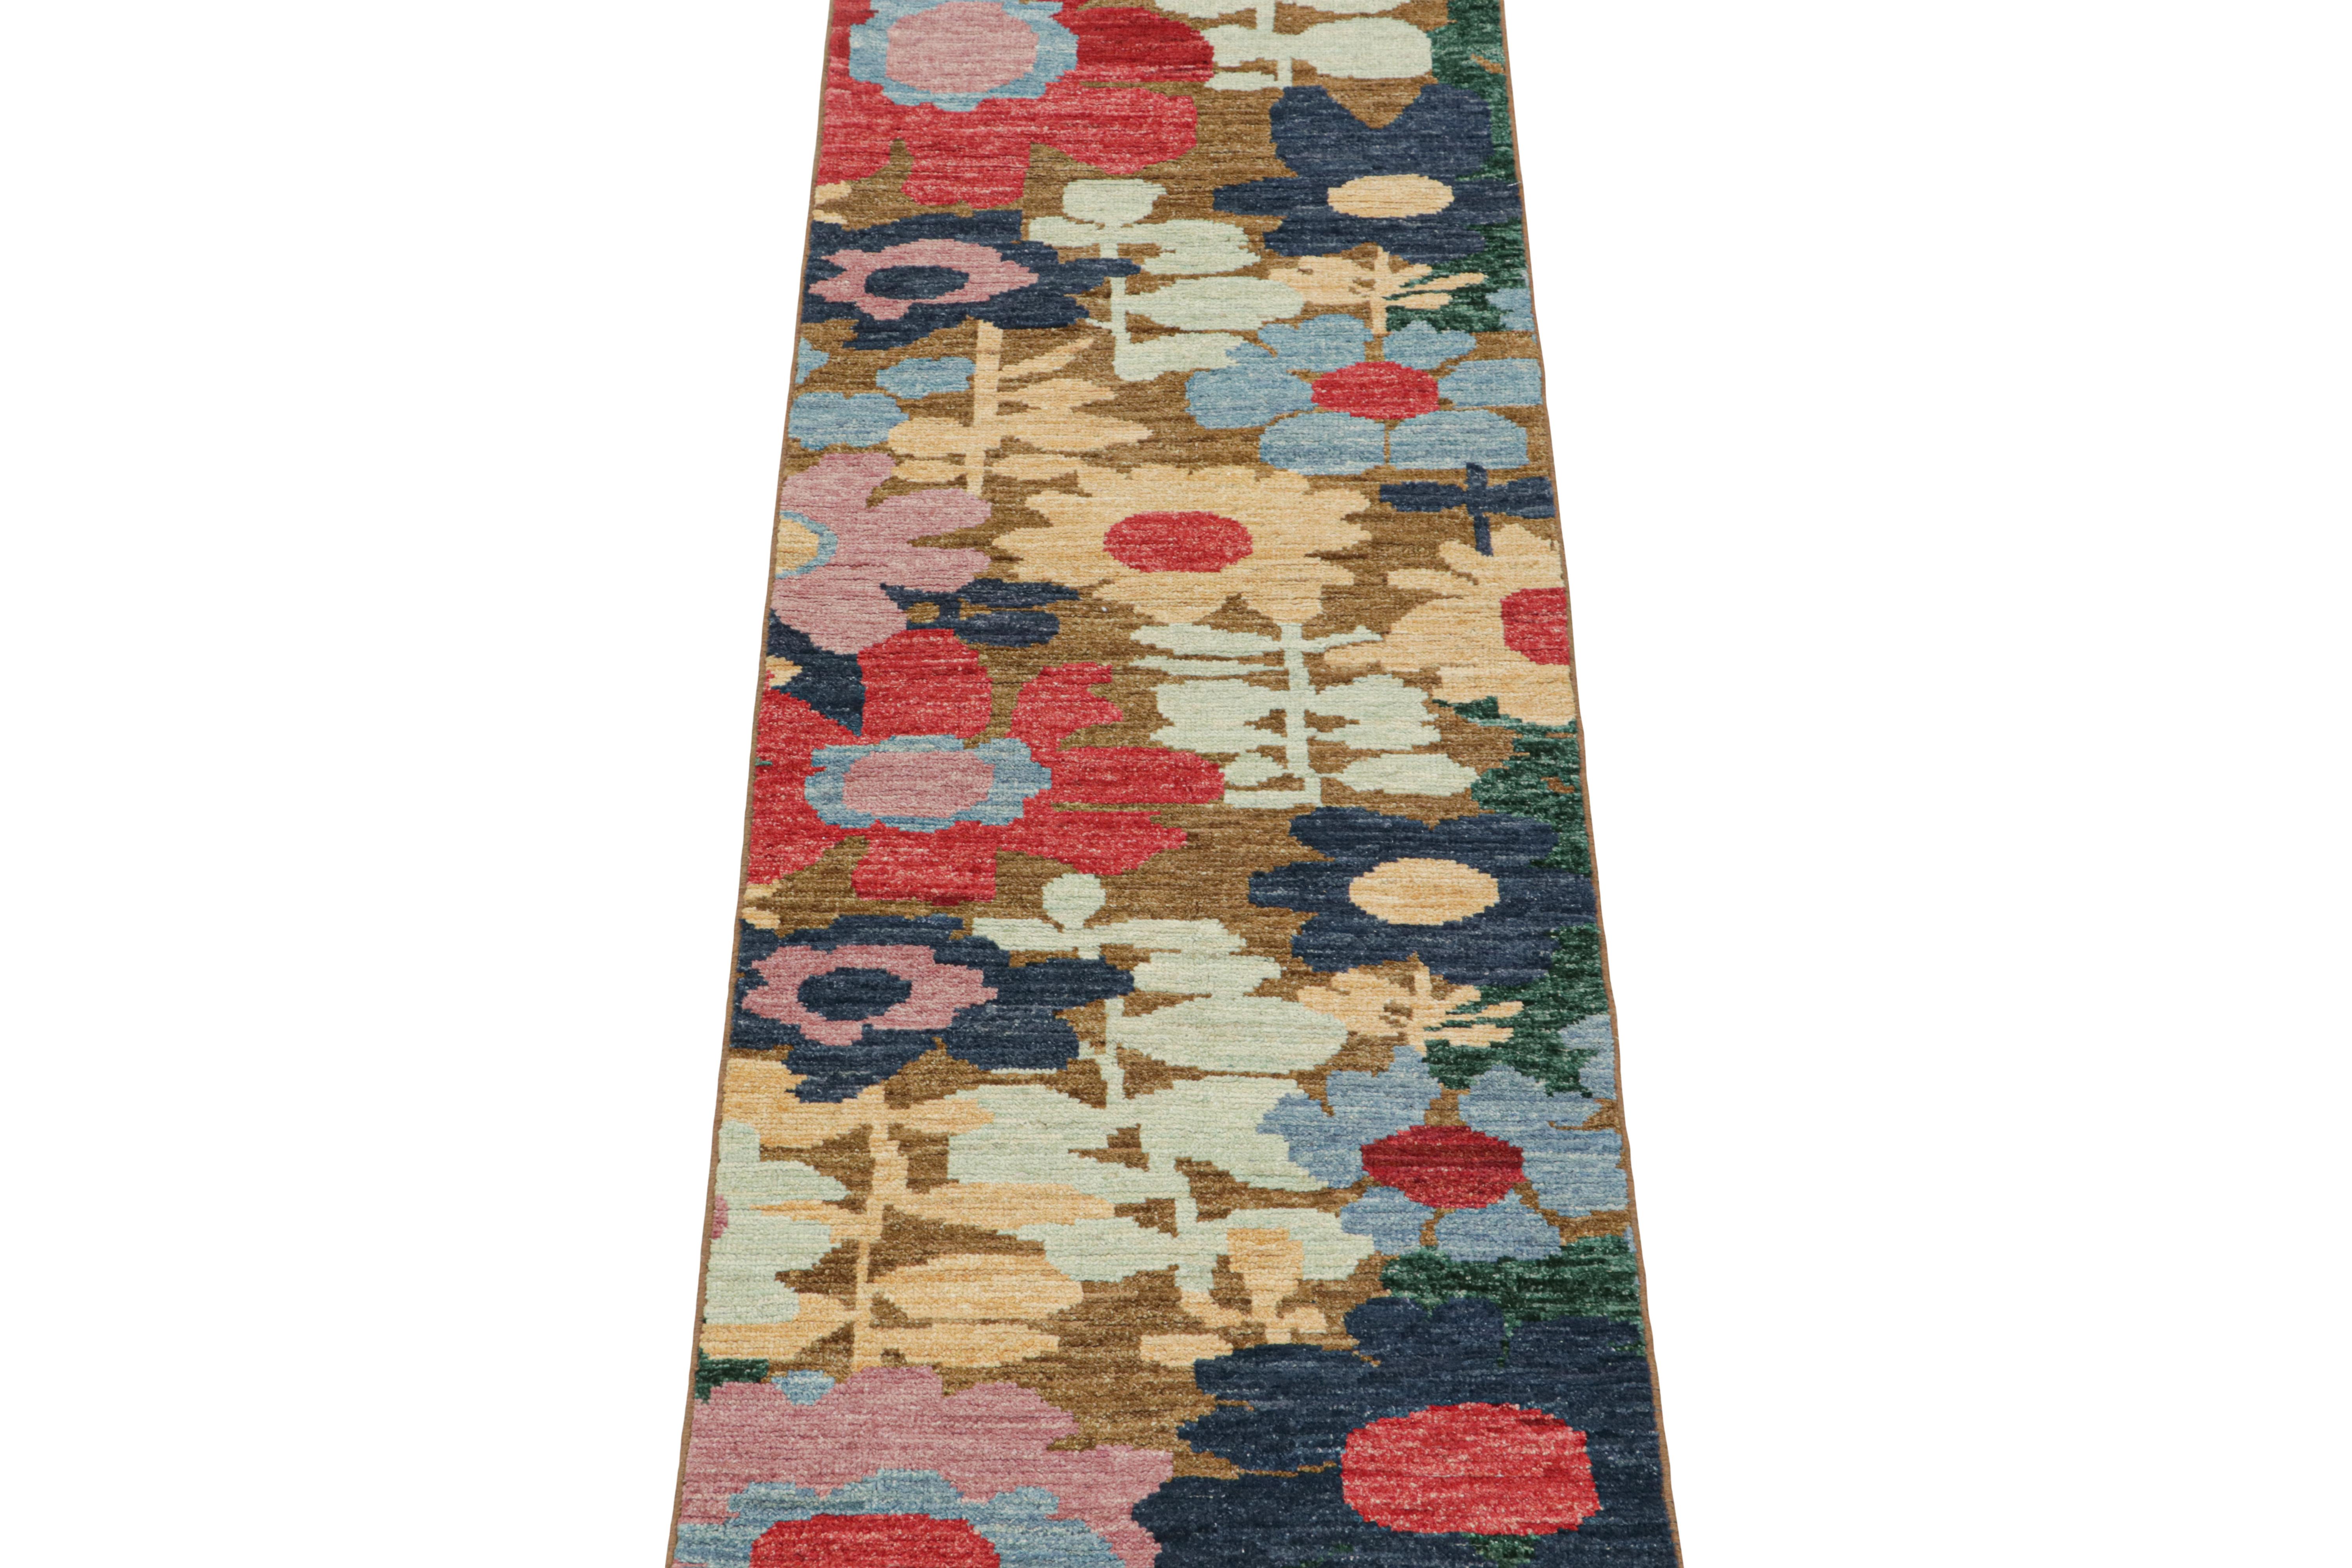 This contemporary 3x8 runner is the latest additions to Rug & Kilim’s New & Modern Collection. Hand-knotted in wool.

Further On the design:

This refreshing piece enjoys polychromatic floral patterns in a playful, almost impressionist look.